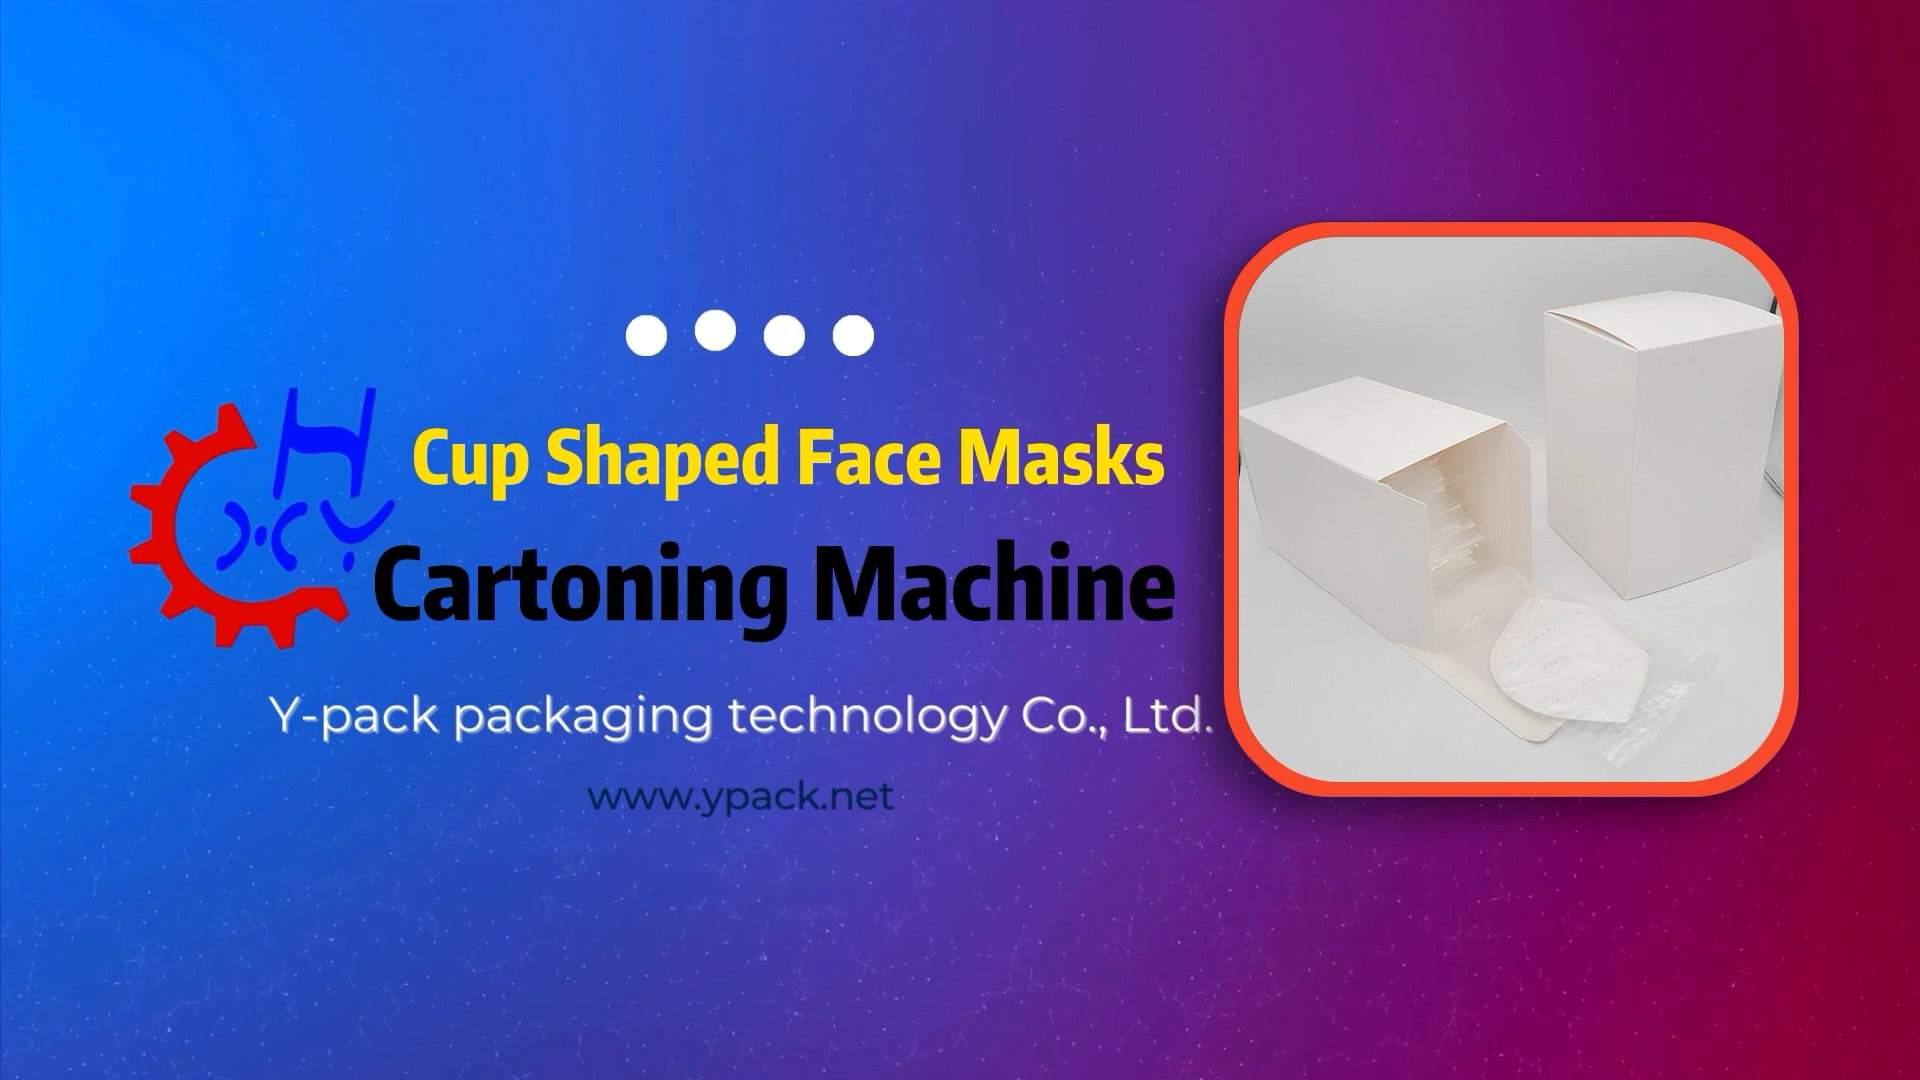 How to Pack COVAFLU Cup Shaped KN95 Face Masks into a Box Mouthpiece Cartooning Machine